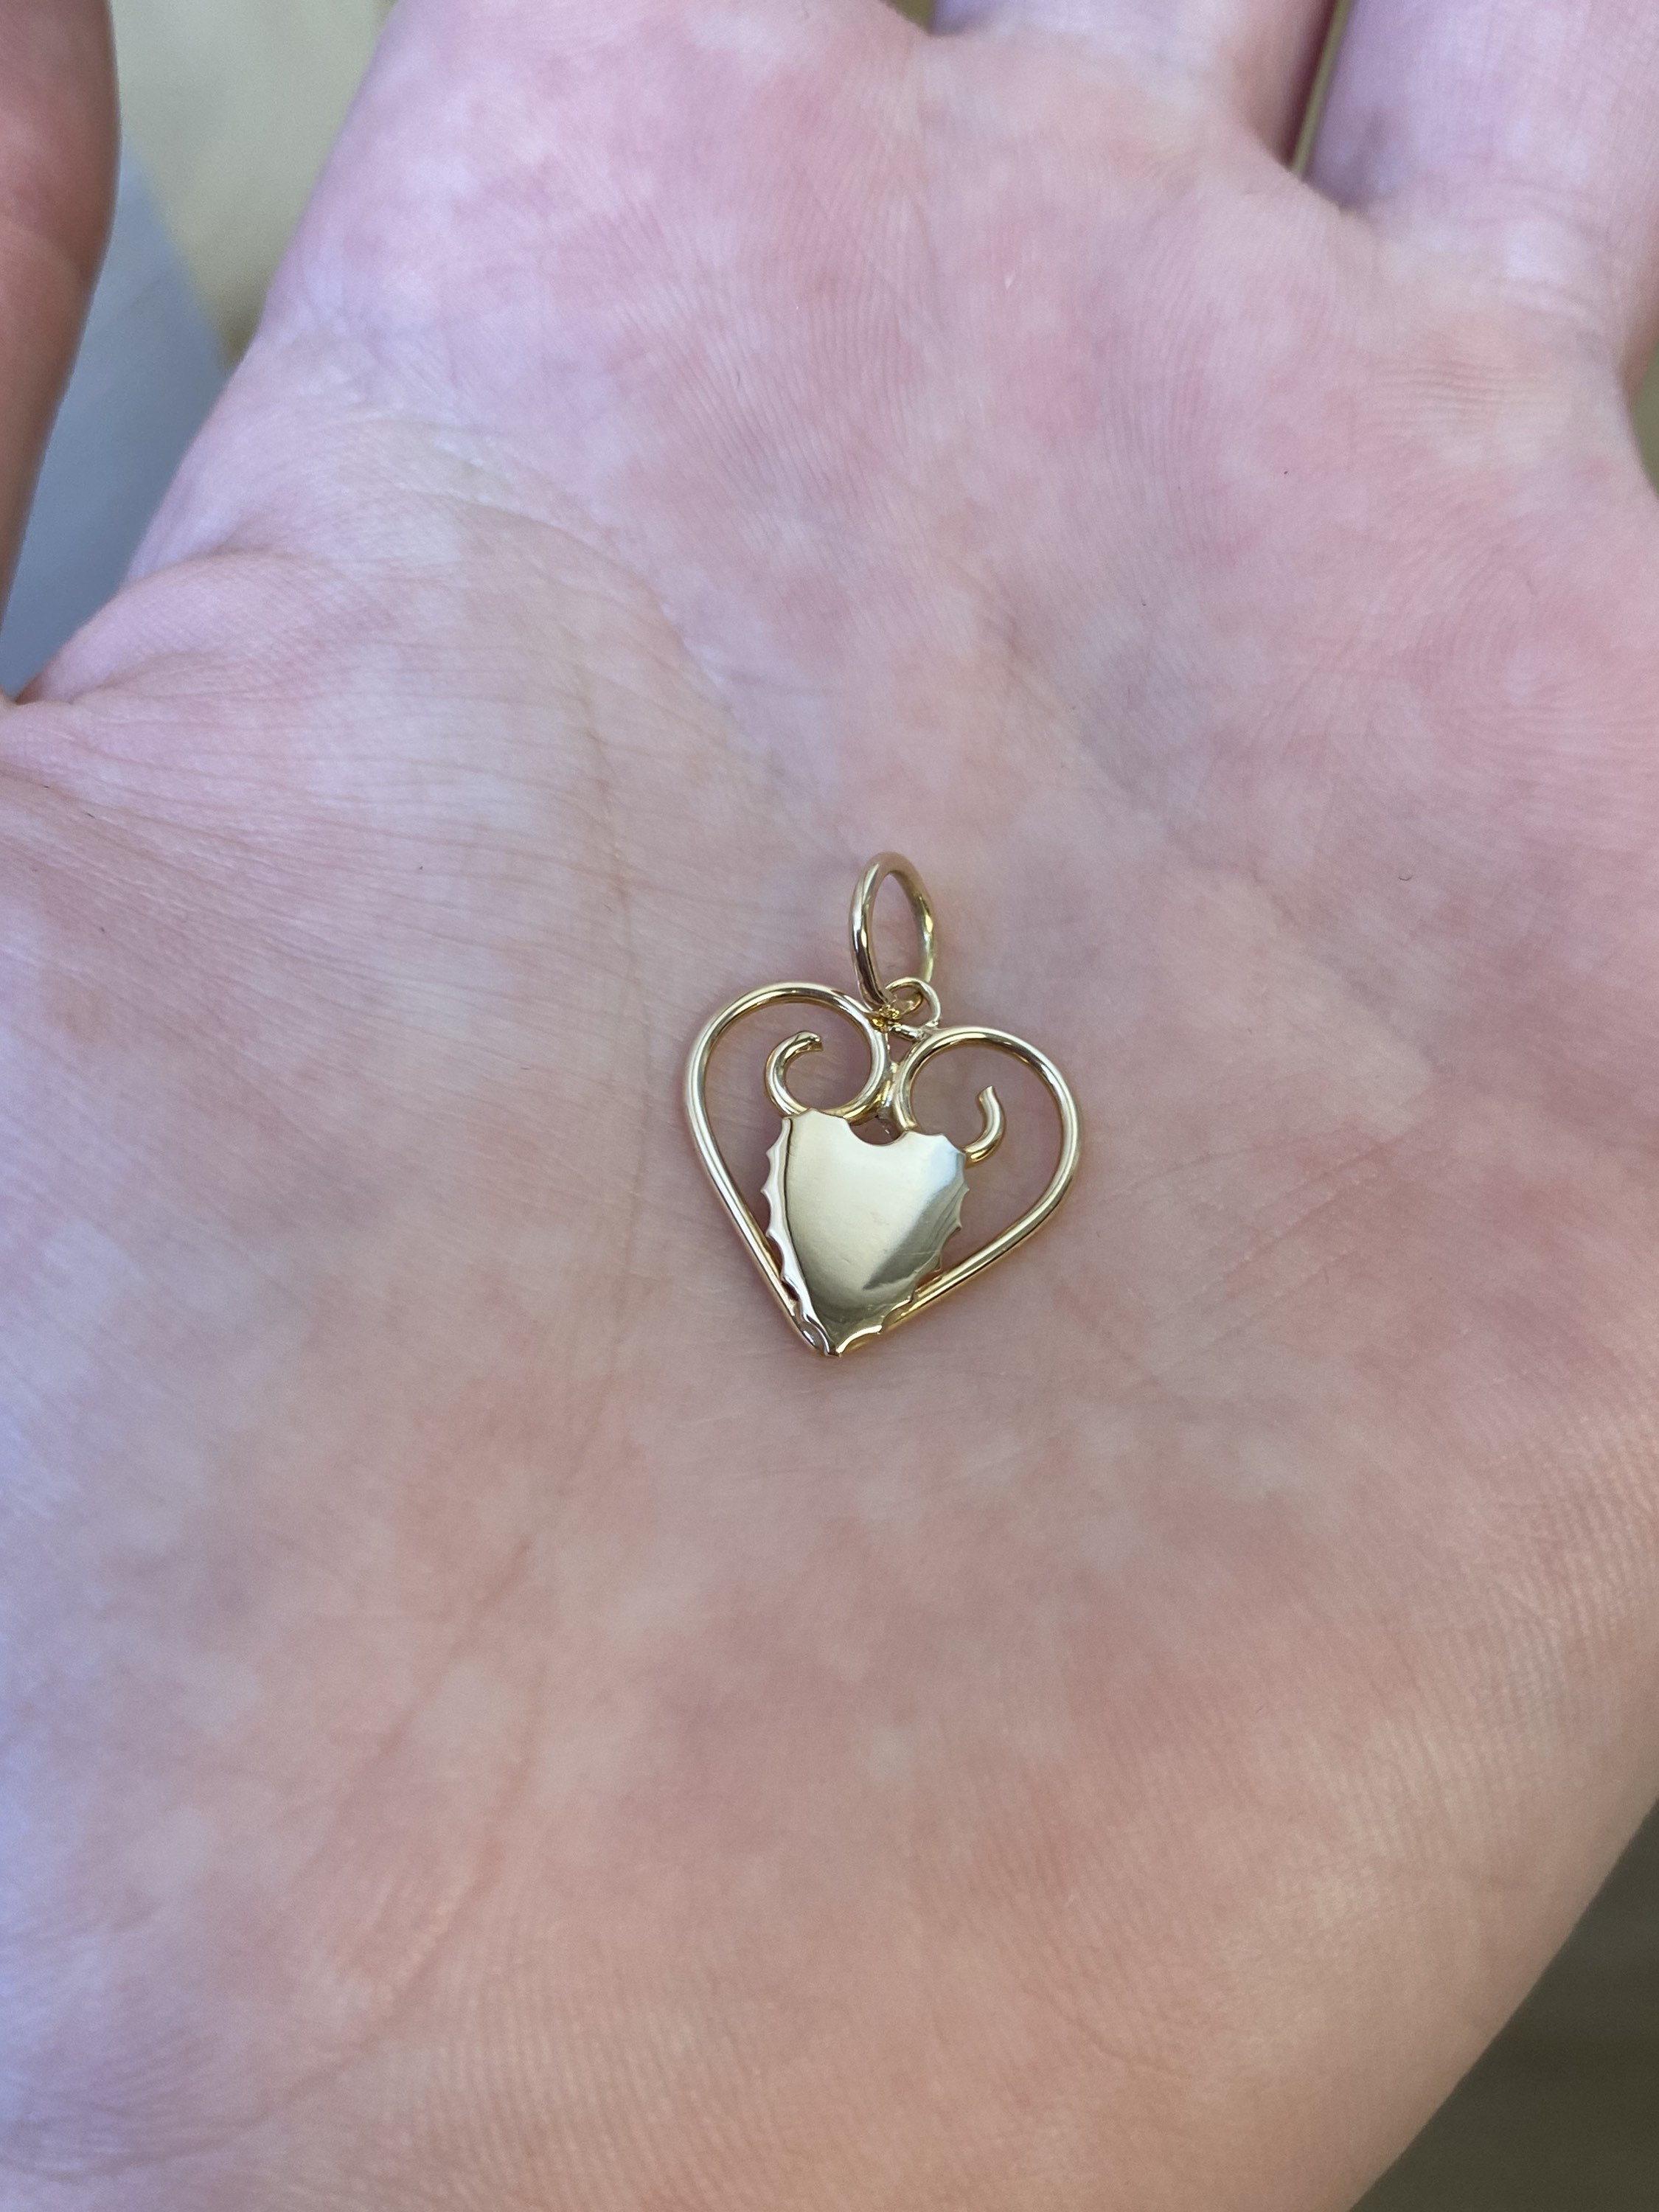 14KT Gold Heart Charm 6mm, 10mm Puffed Heart Charm Small Heart Charm Real  Gold Heart Pendant Available in Yellow, White & Rose Gold 